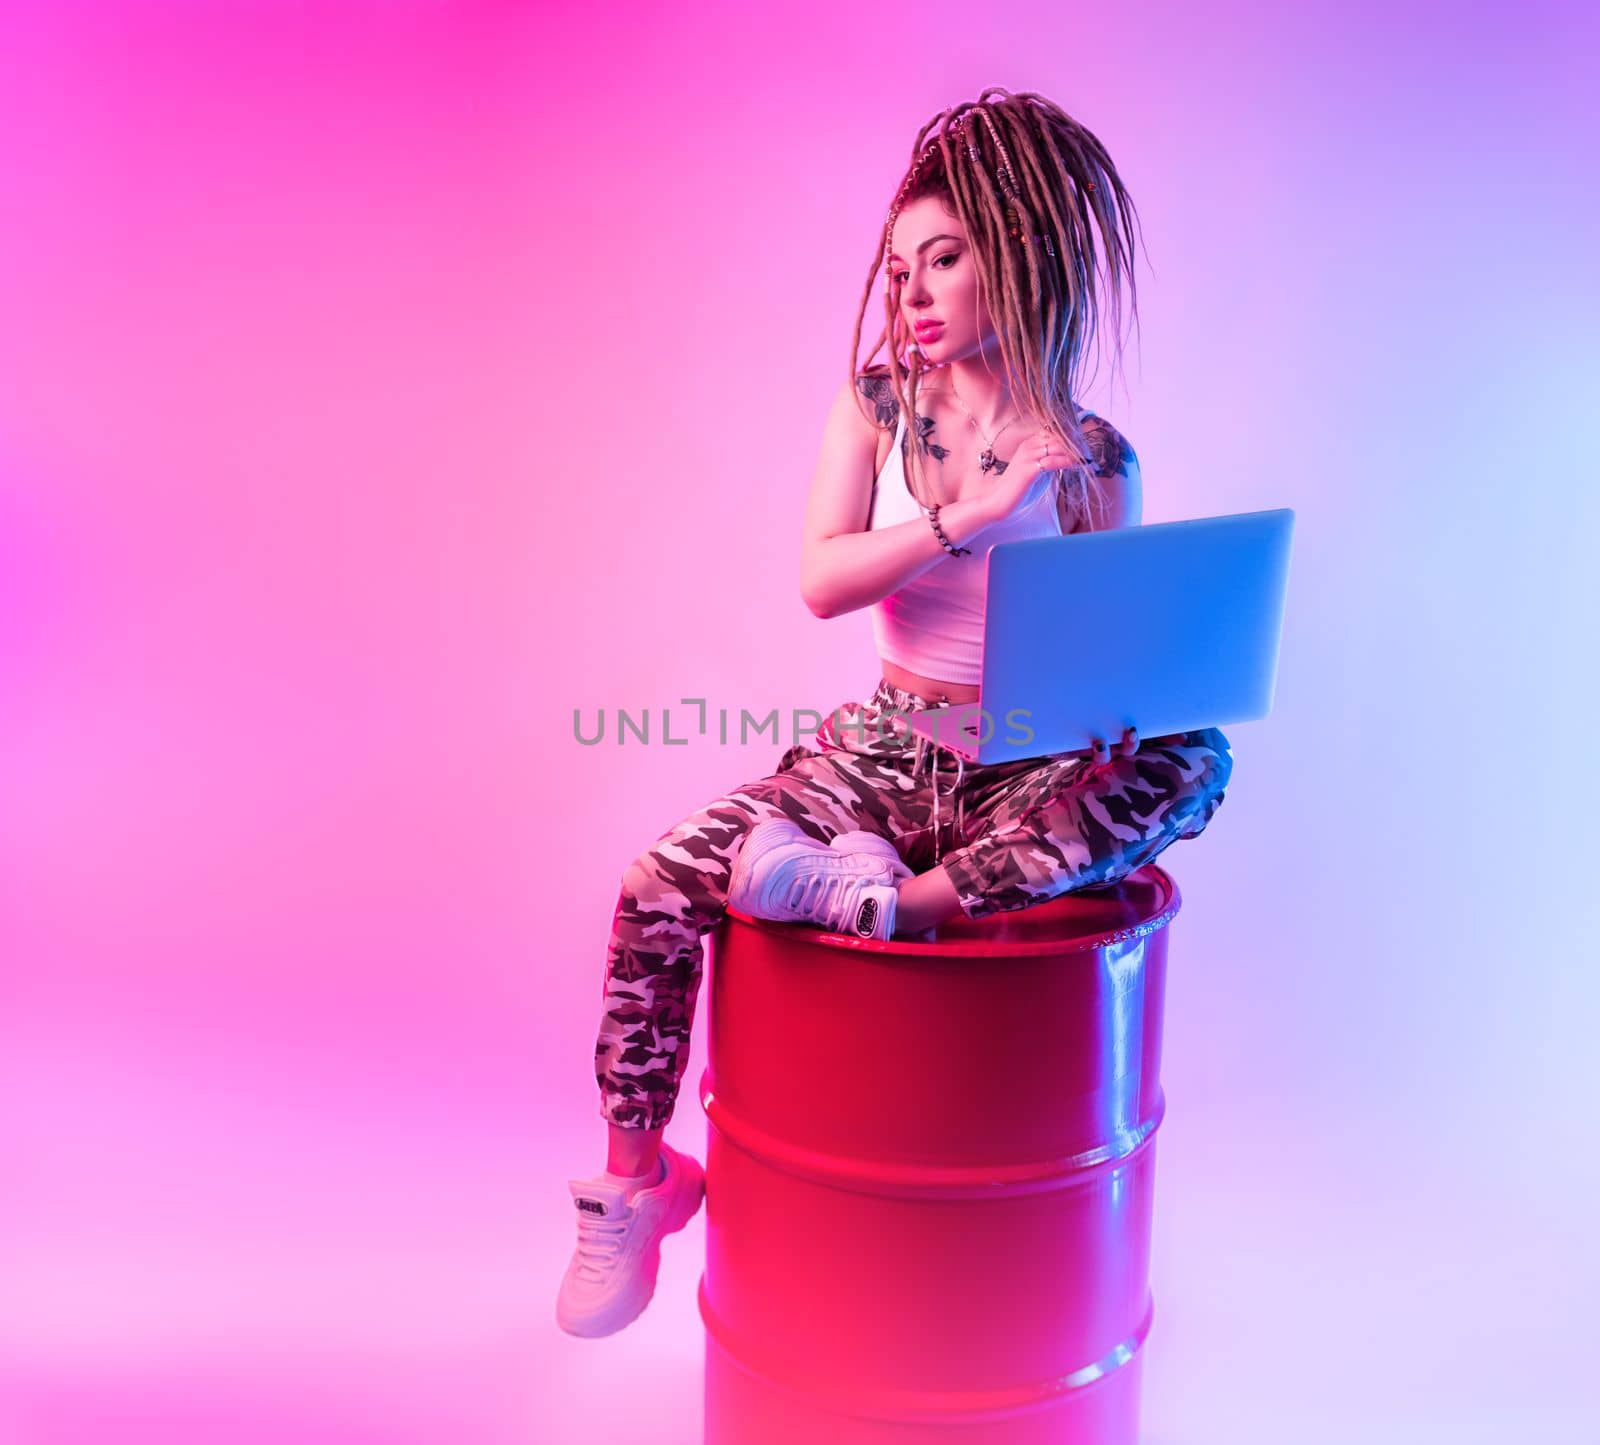 sexy girl with braids dreadlocks on her head in neon light with a laptop on a light background copy paste